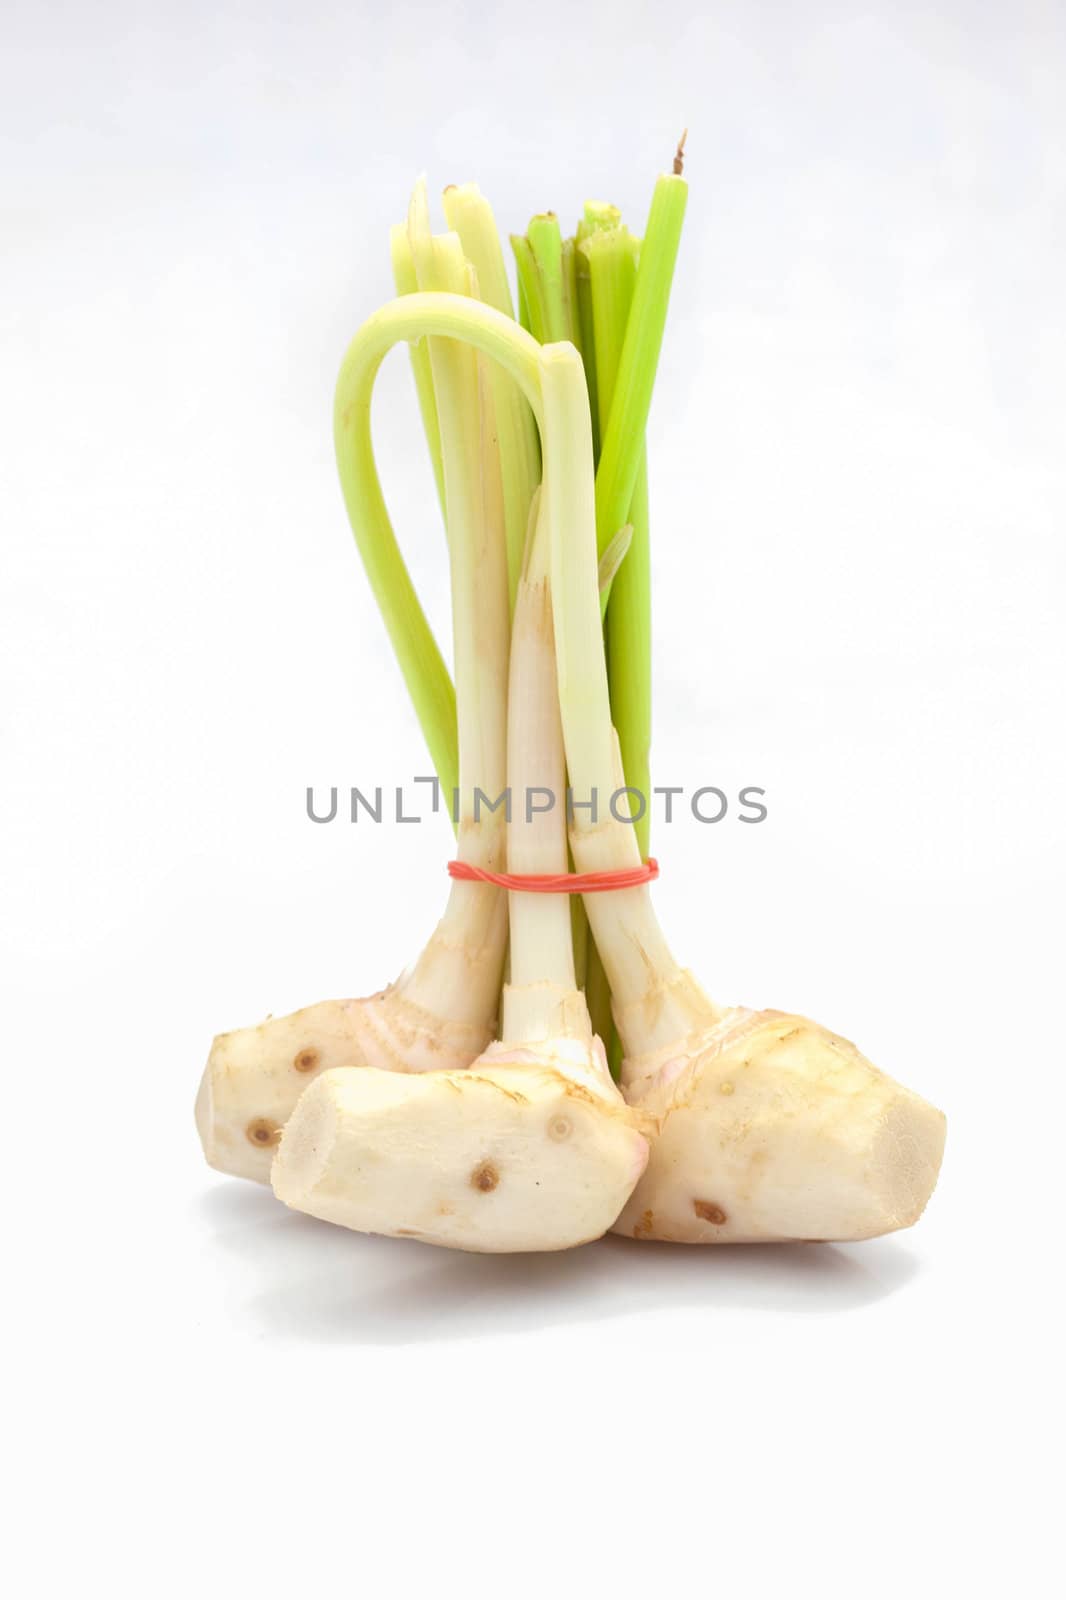 Ginger sprout on a white background.